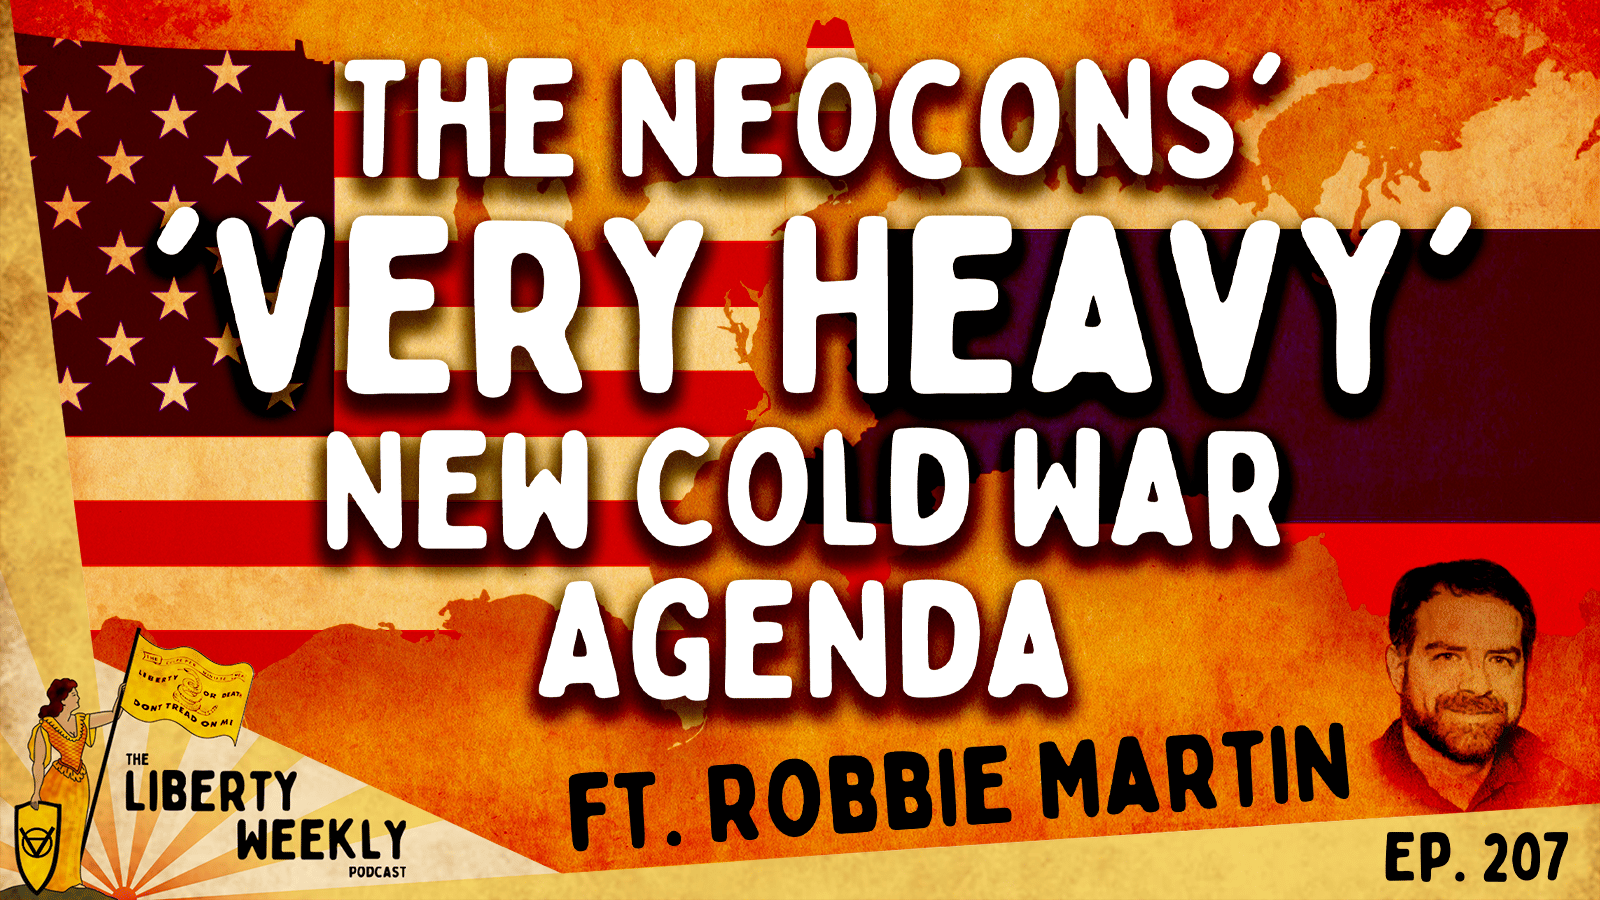 The Neocons’ ‘Very Heavy’ New Cold War Agenda ft. Robbie Martin Ep. 207